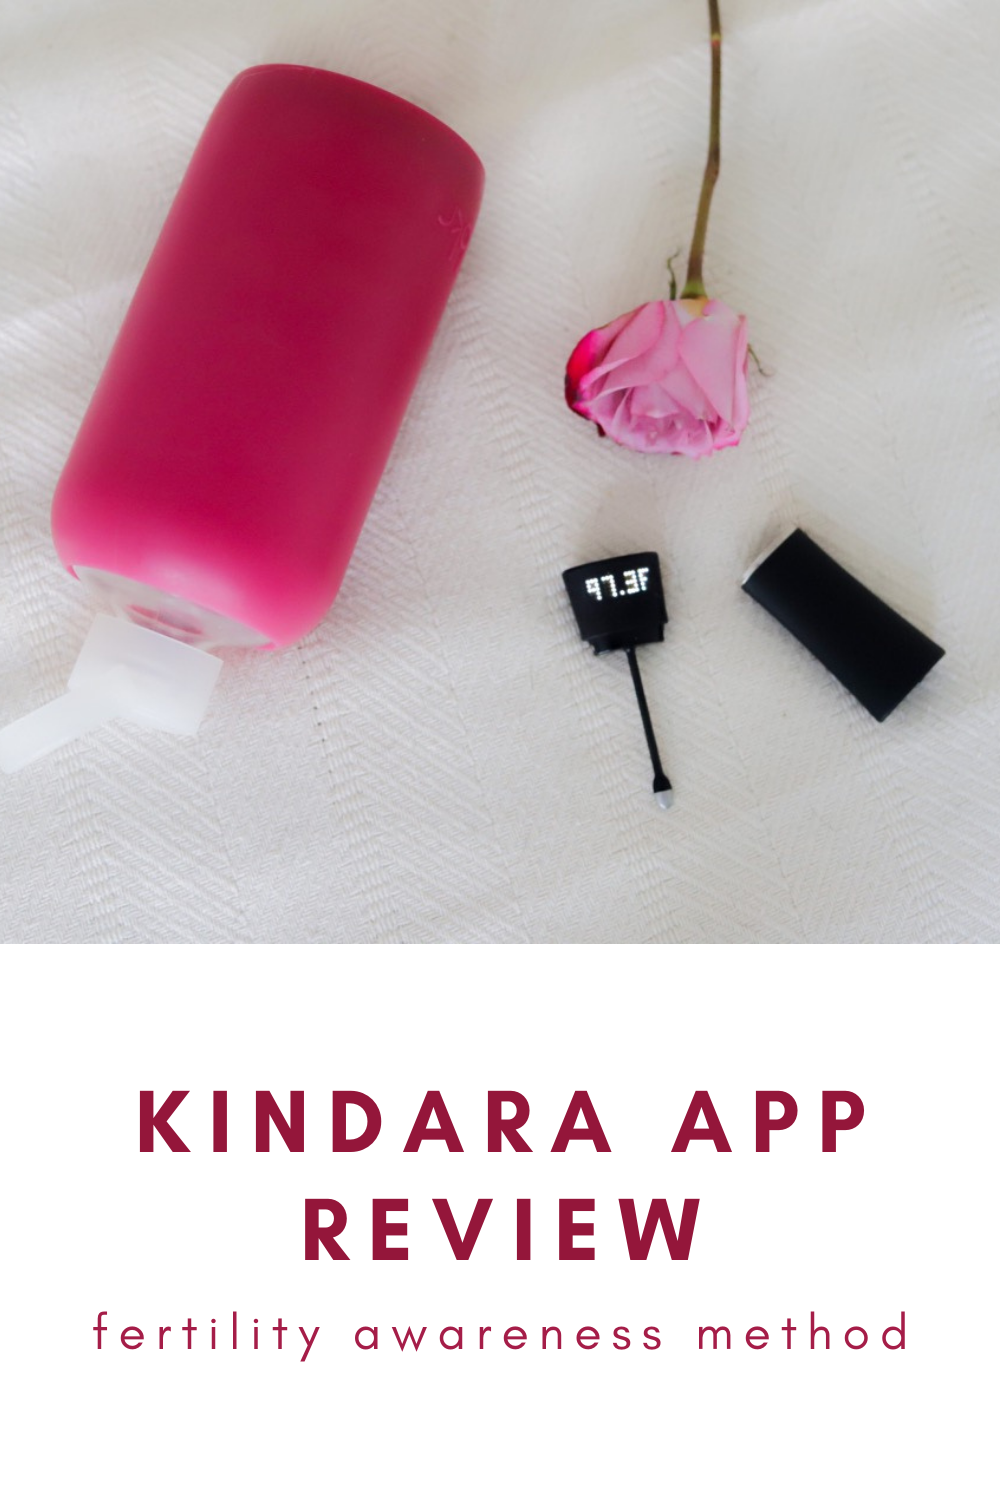 kindara app review, period cycle tracker, fertility tracker, natural birth control, lments of style, best period ovulation app tracker, la blogger, womens wellness, bbt, basal body temperature